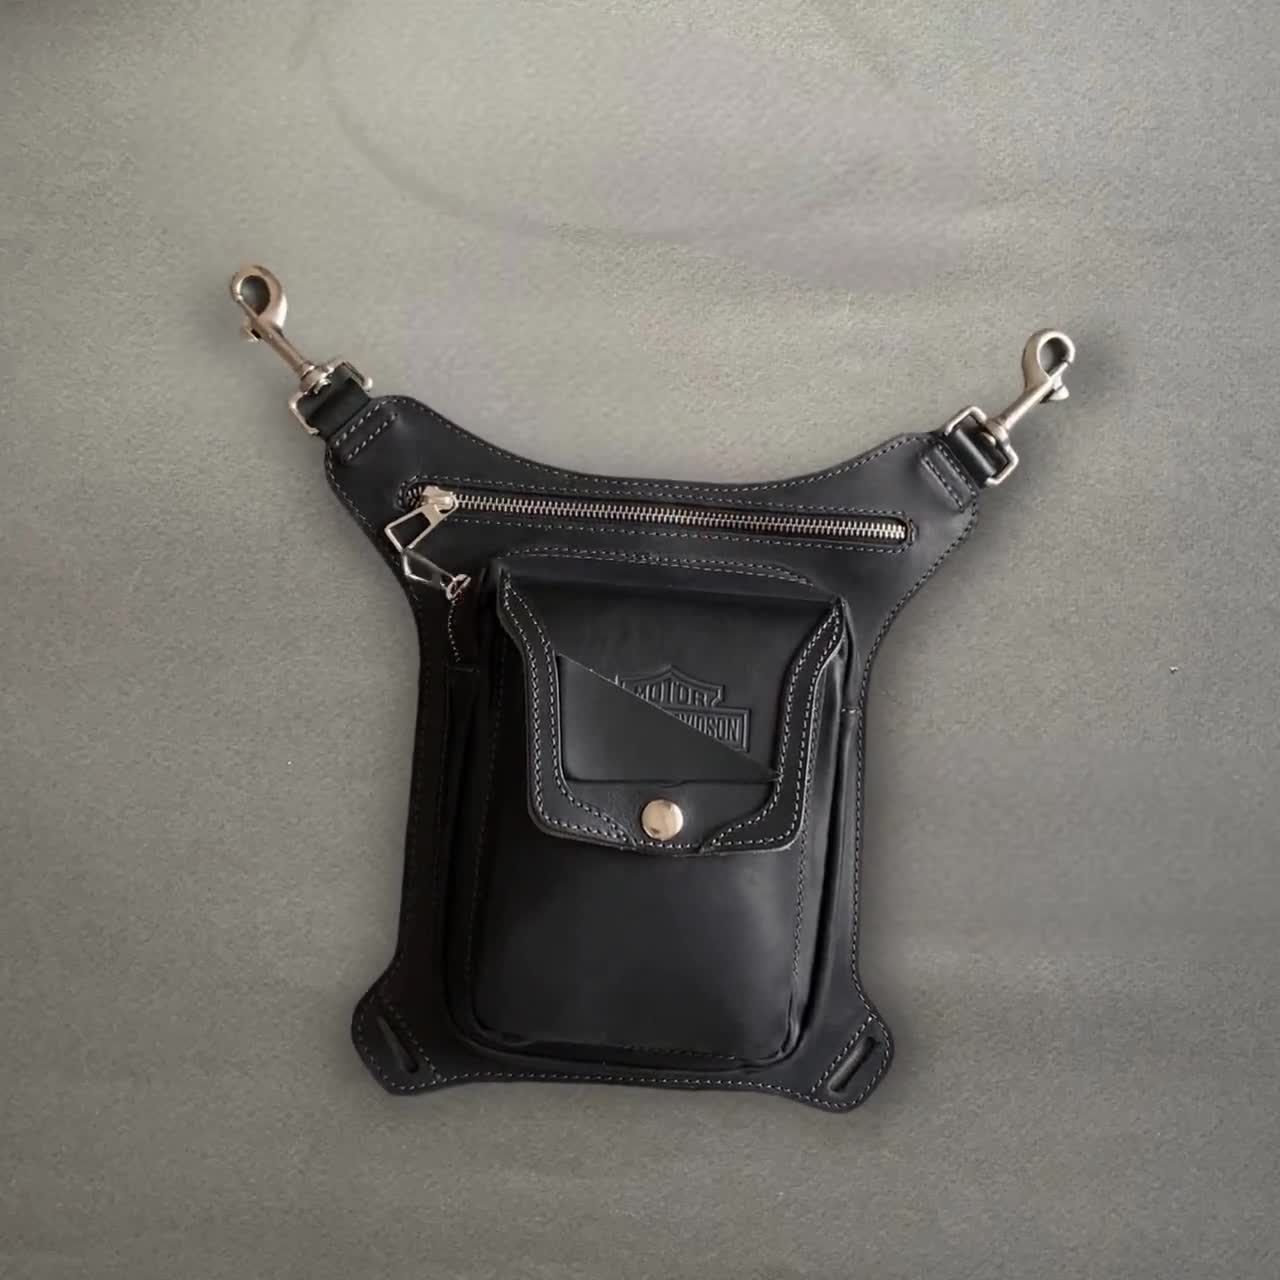 Leather Hip Shoulder Crossbody Waist Leg Thigh Holster Bag, Utility Belt  Pourch, Personalized Boyfriend Gift, Father's Day Gift 